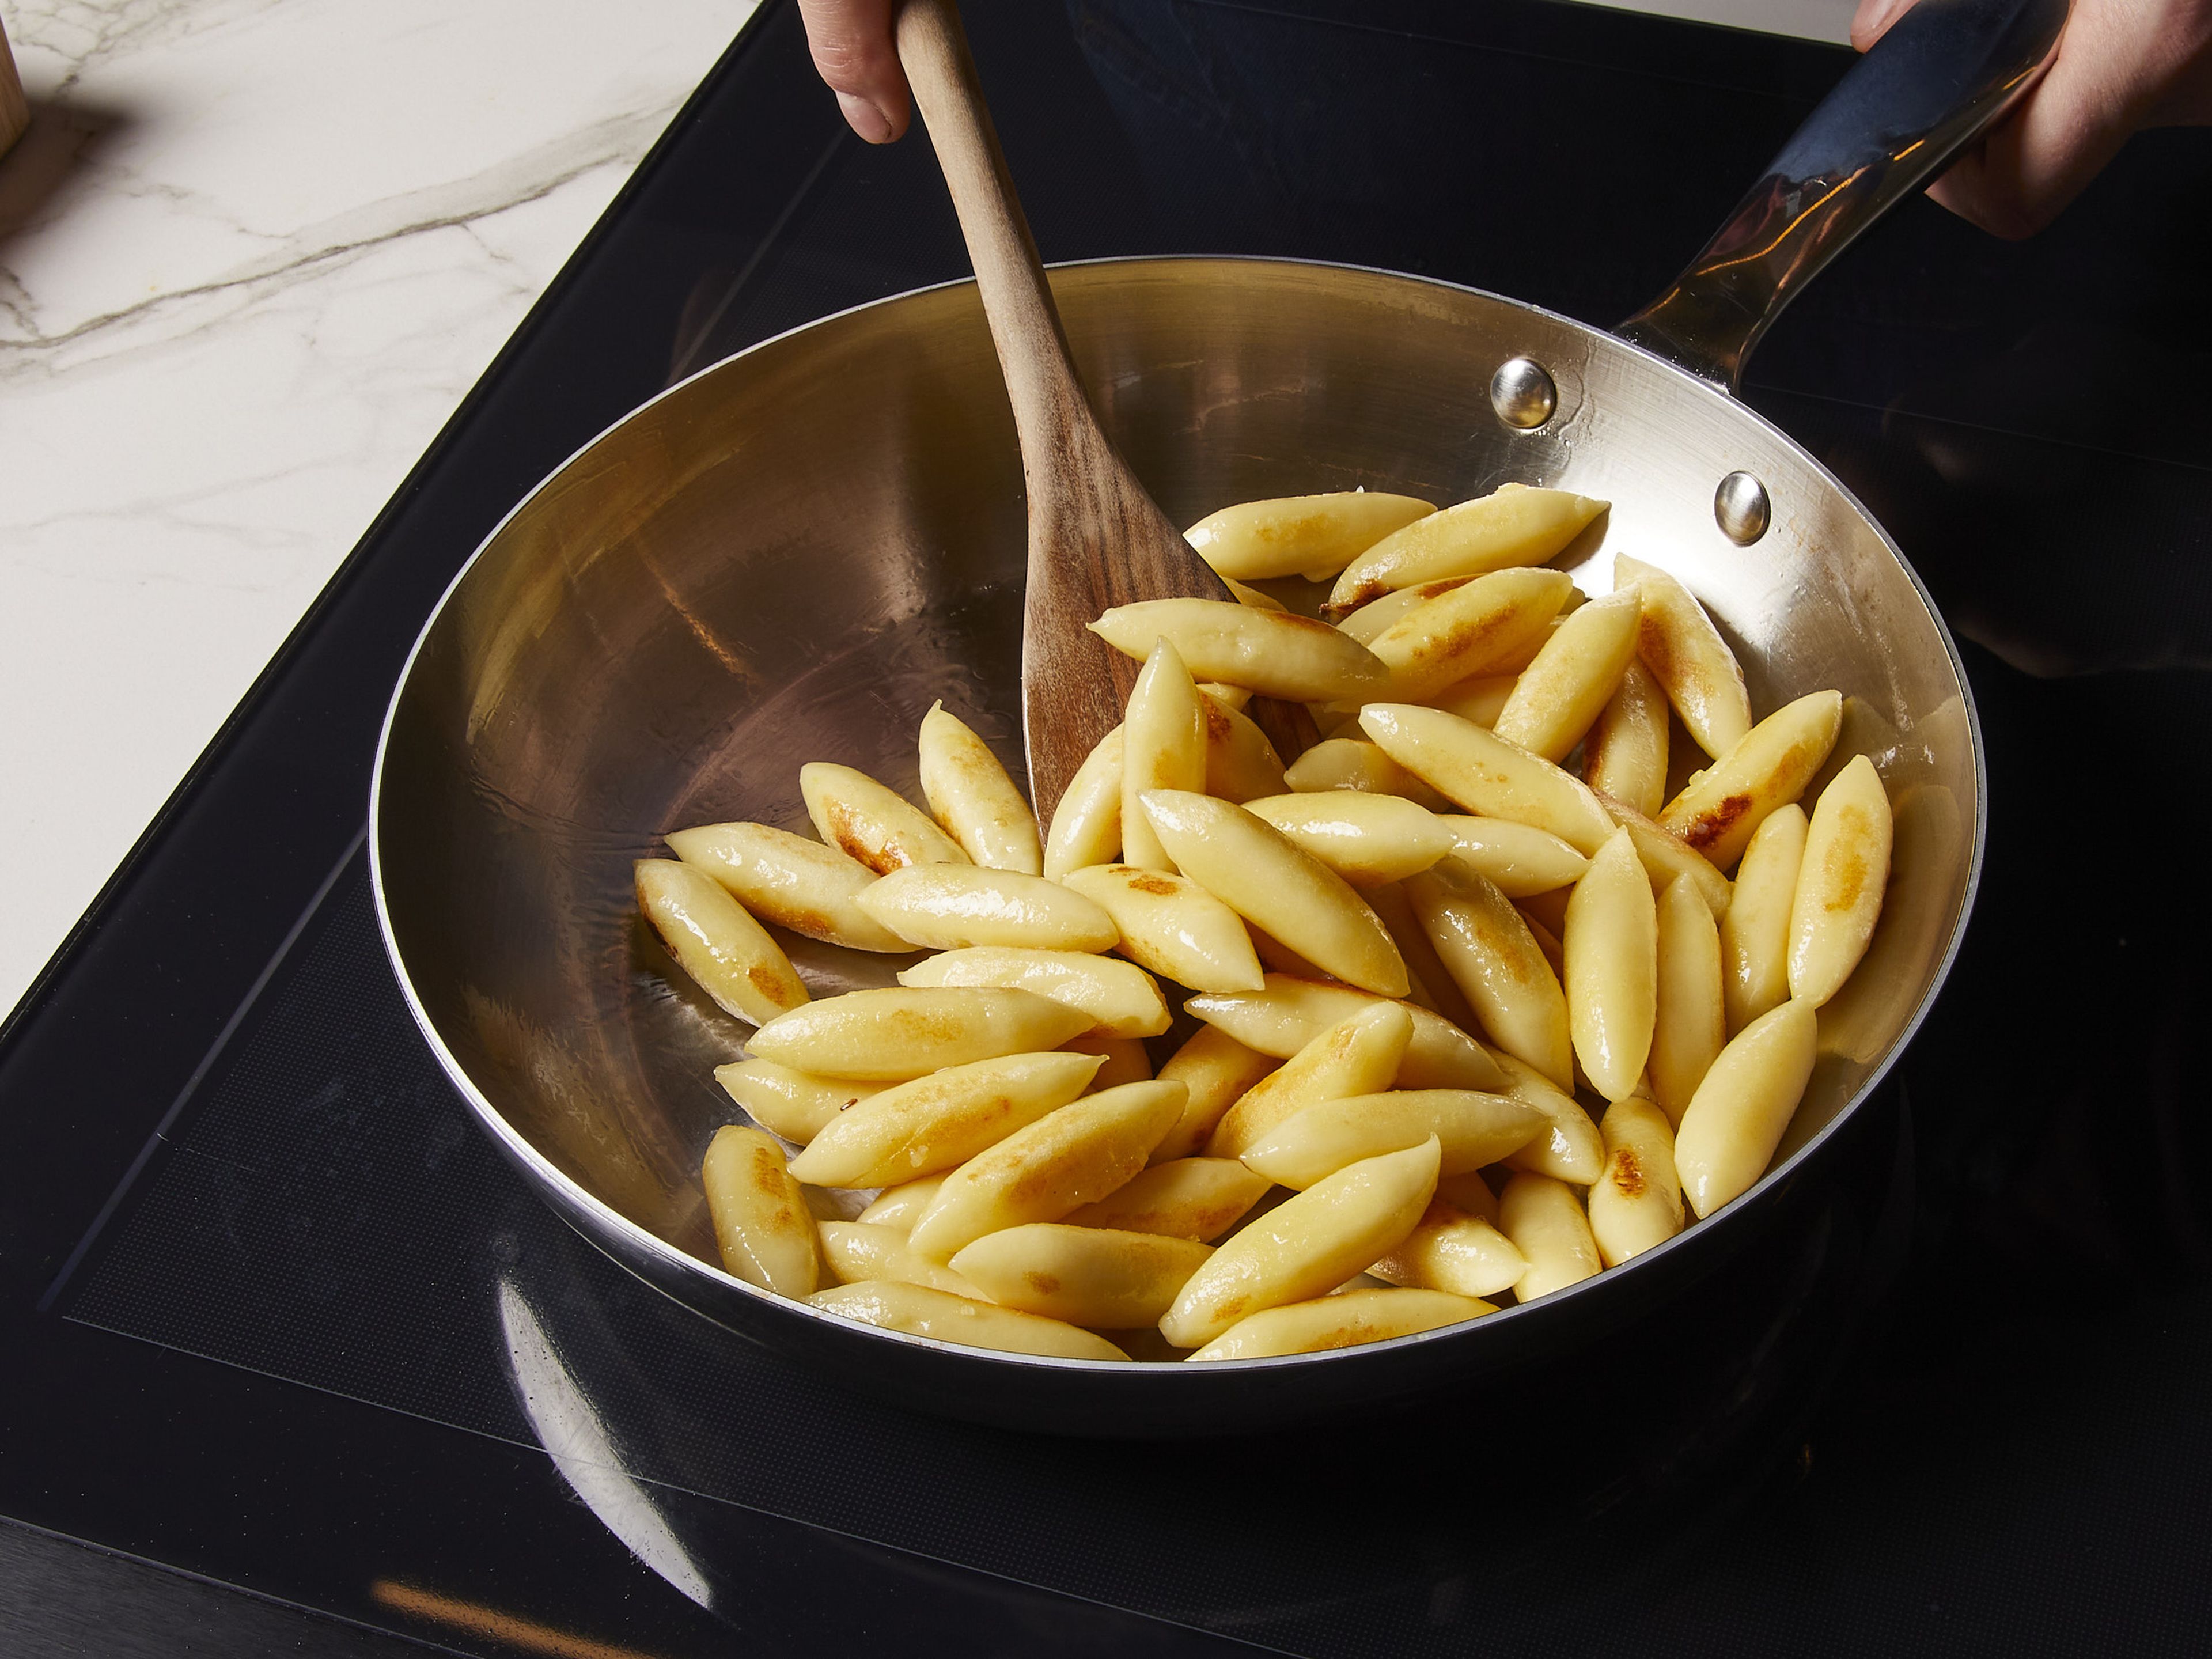 Heat oil in a pan. Fry the German gnocchi until golden brown and crispy. Then, remove from the pan and set aside.